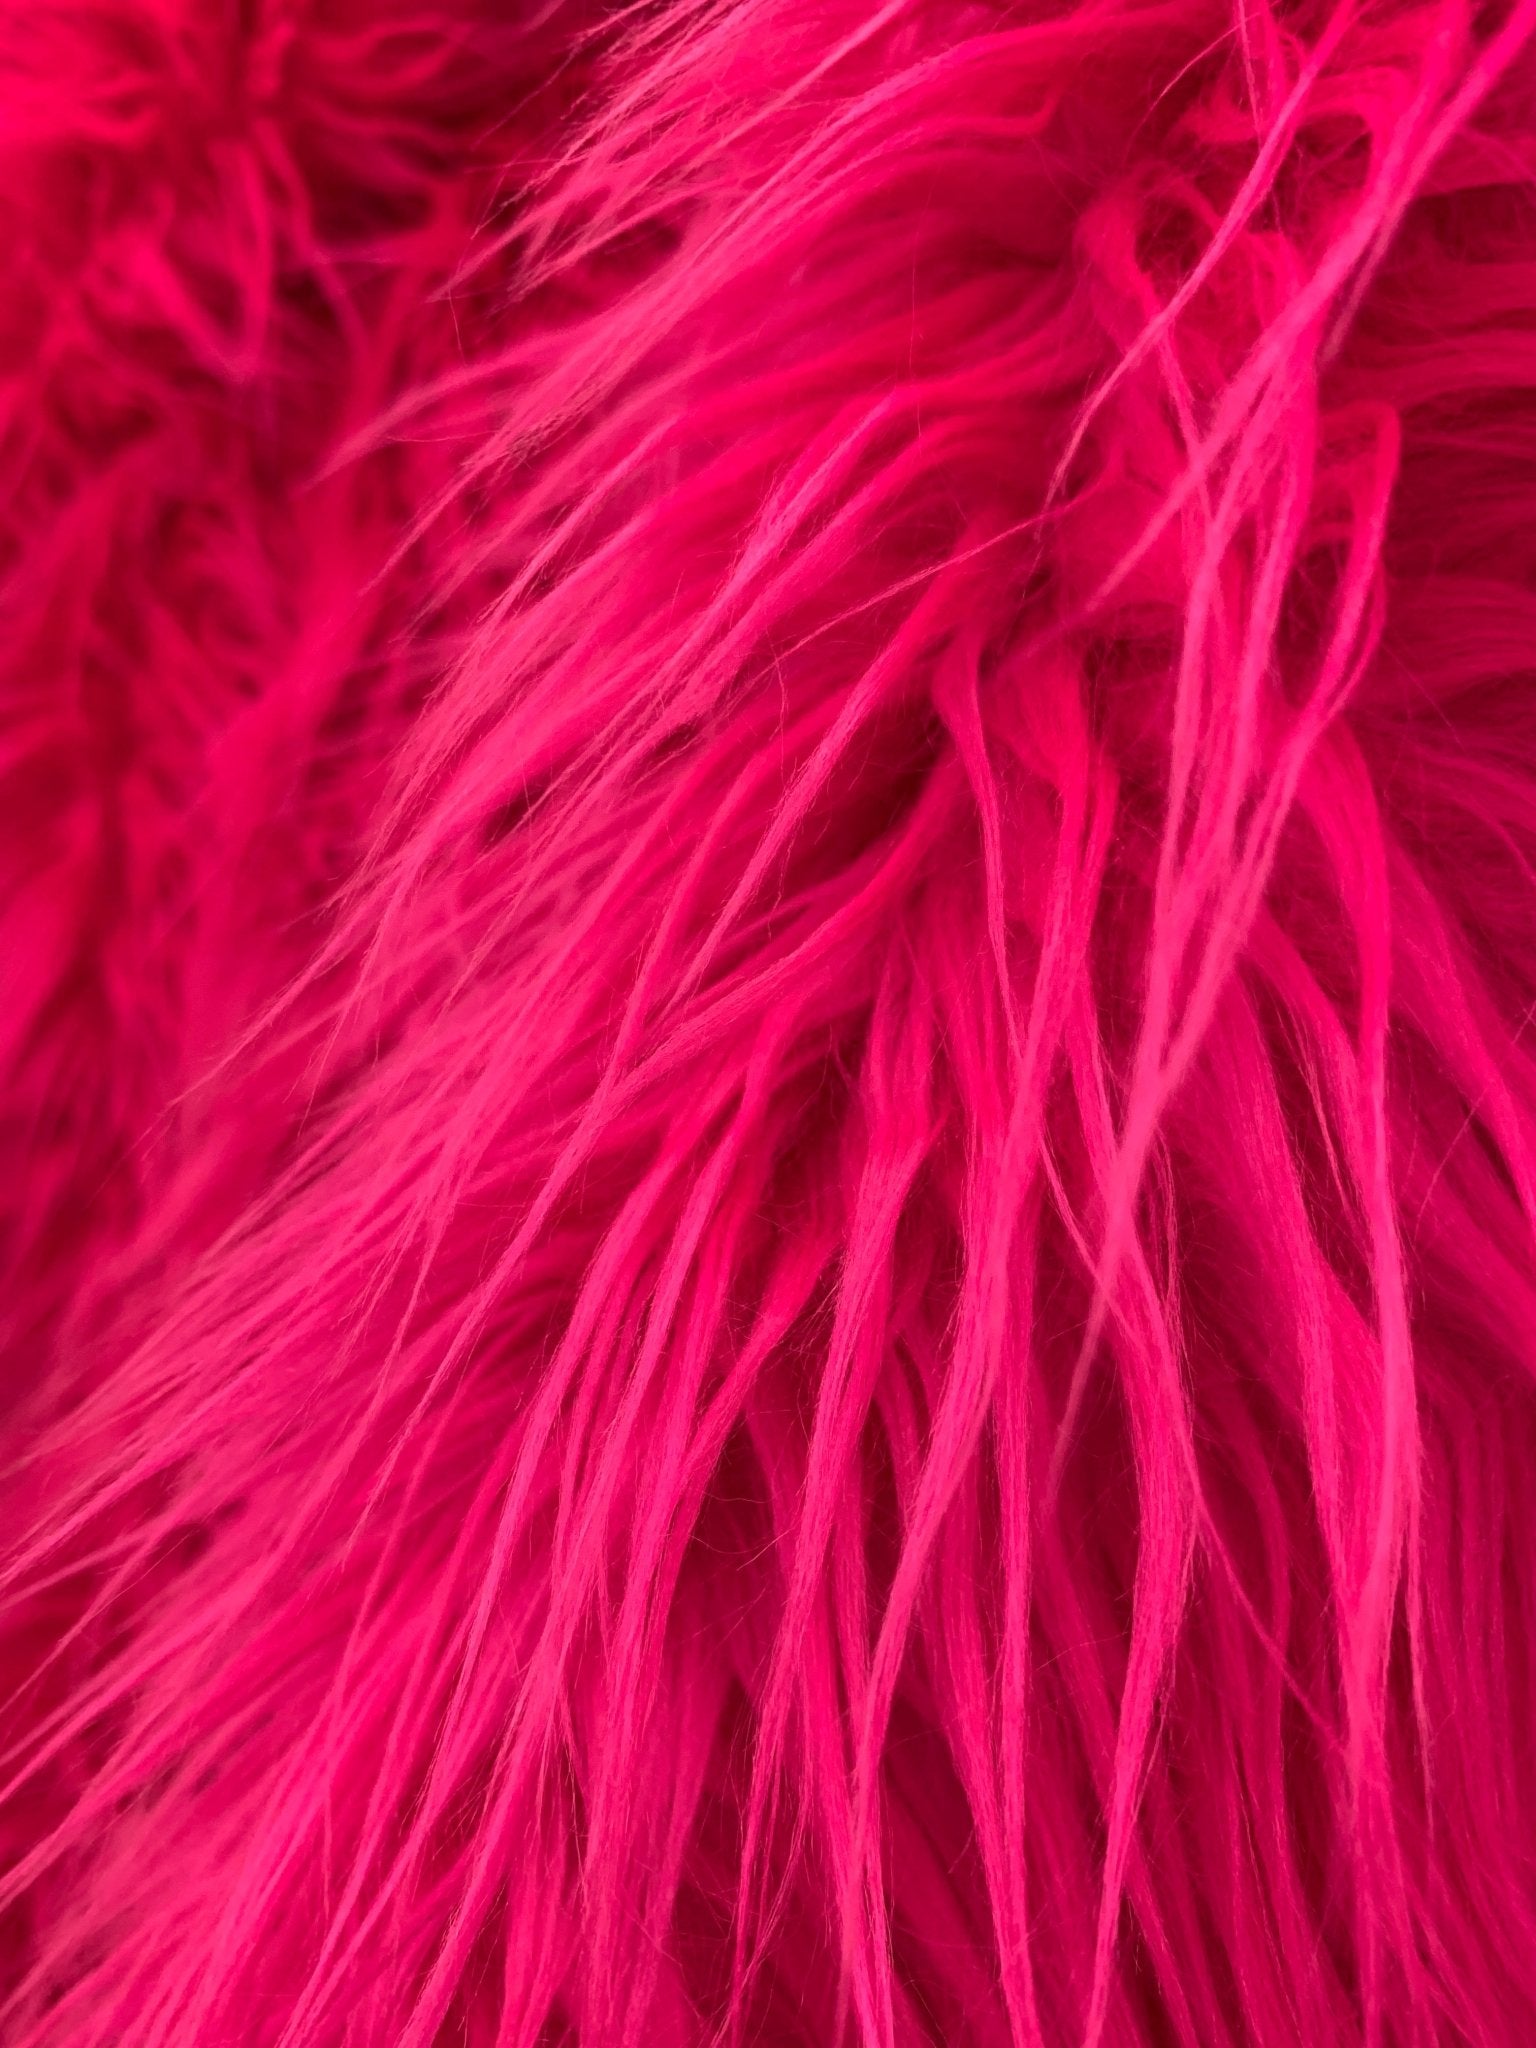 Mongolian Long Pile Fake Faux Fur Fabric Sold By The YardICEFABRICICE FABRICSHot PinkBy The Yard (60 inches Wide)Mongolian Long Pile Fake Faux Fur Fabric Sold By The Yard ICEFABRIC